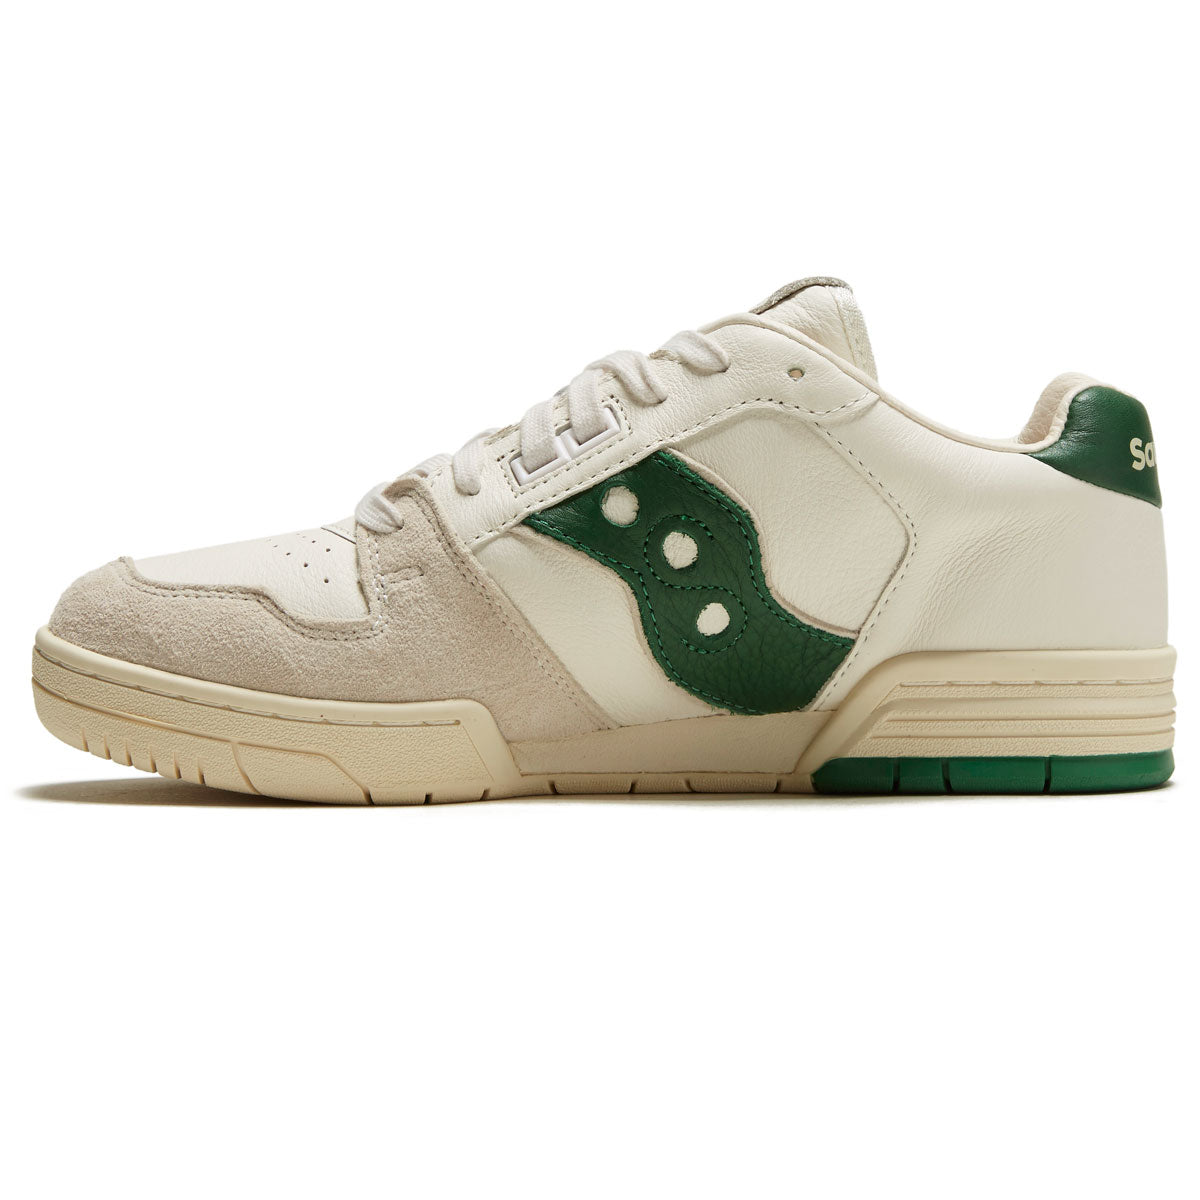 Saucony Sonic Low Shoes - Beige/Green image 2